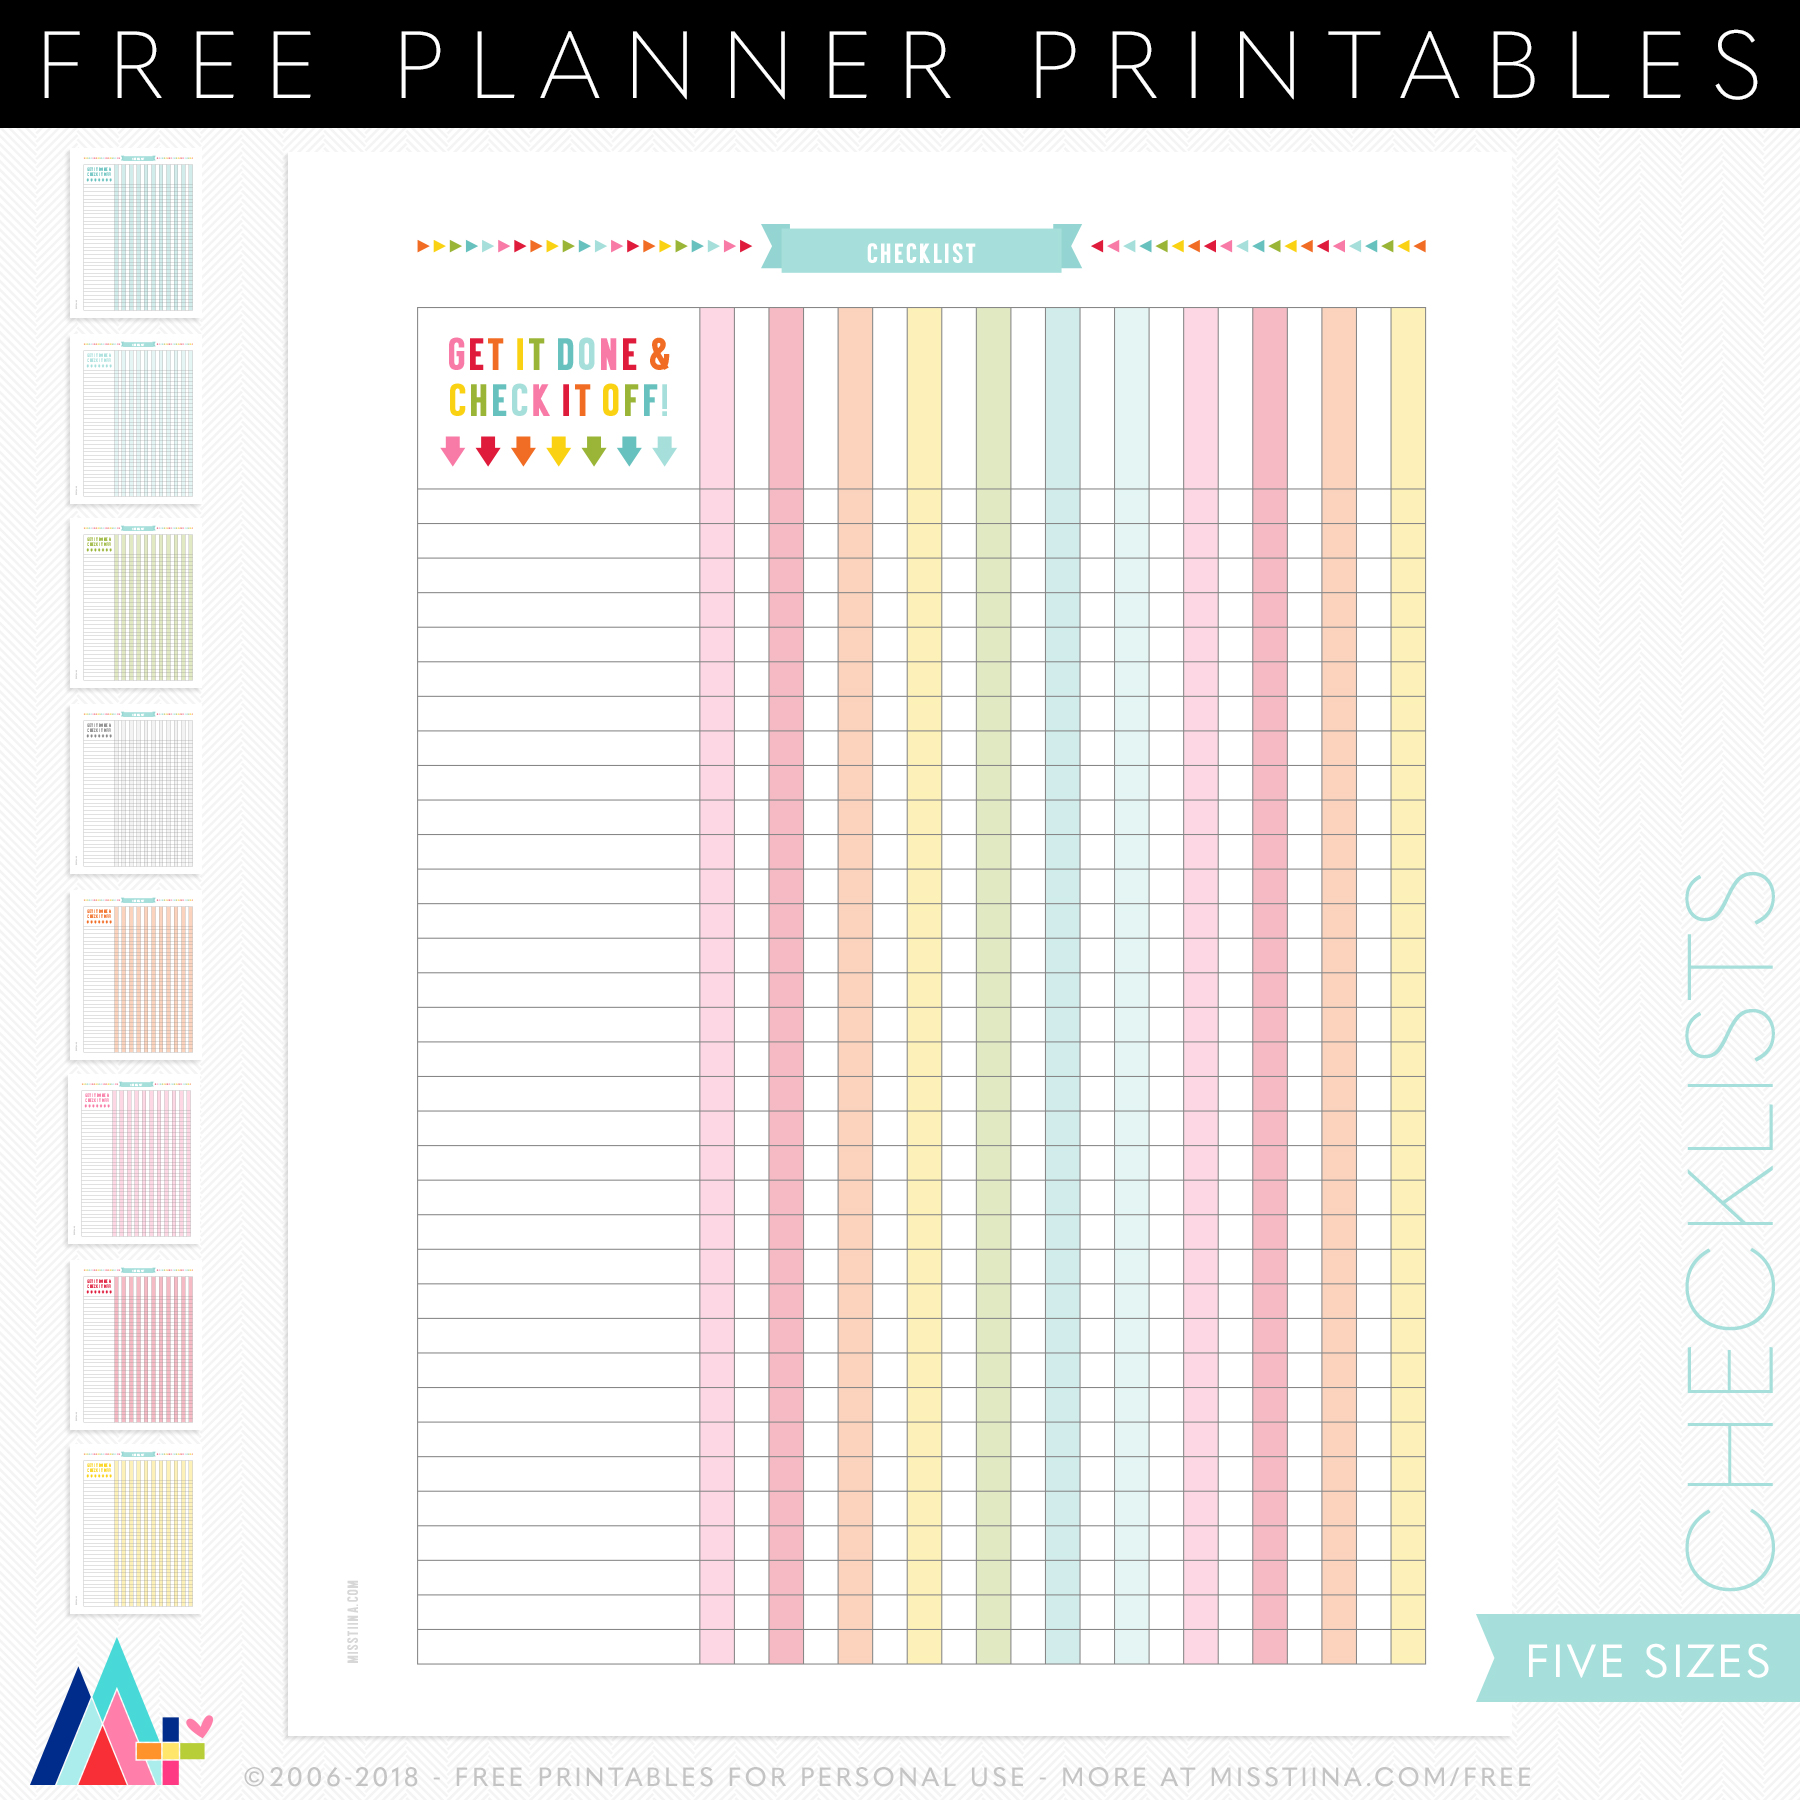 FREE Checklists Planner Page Printables